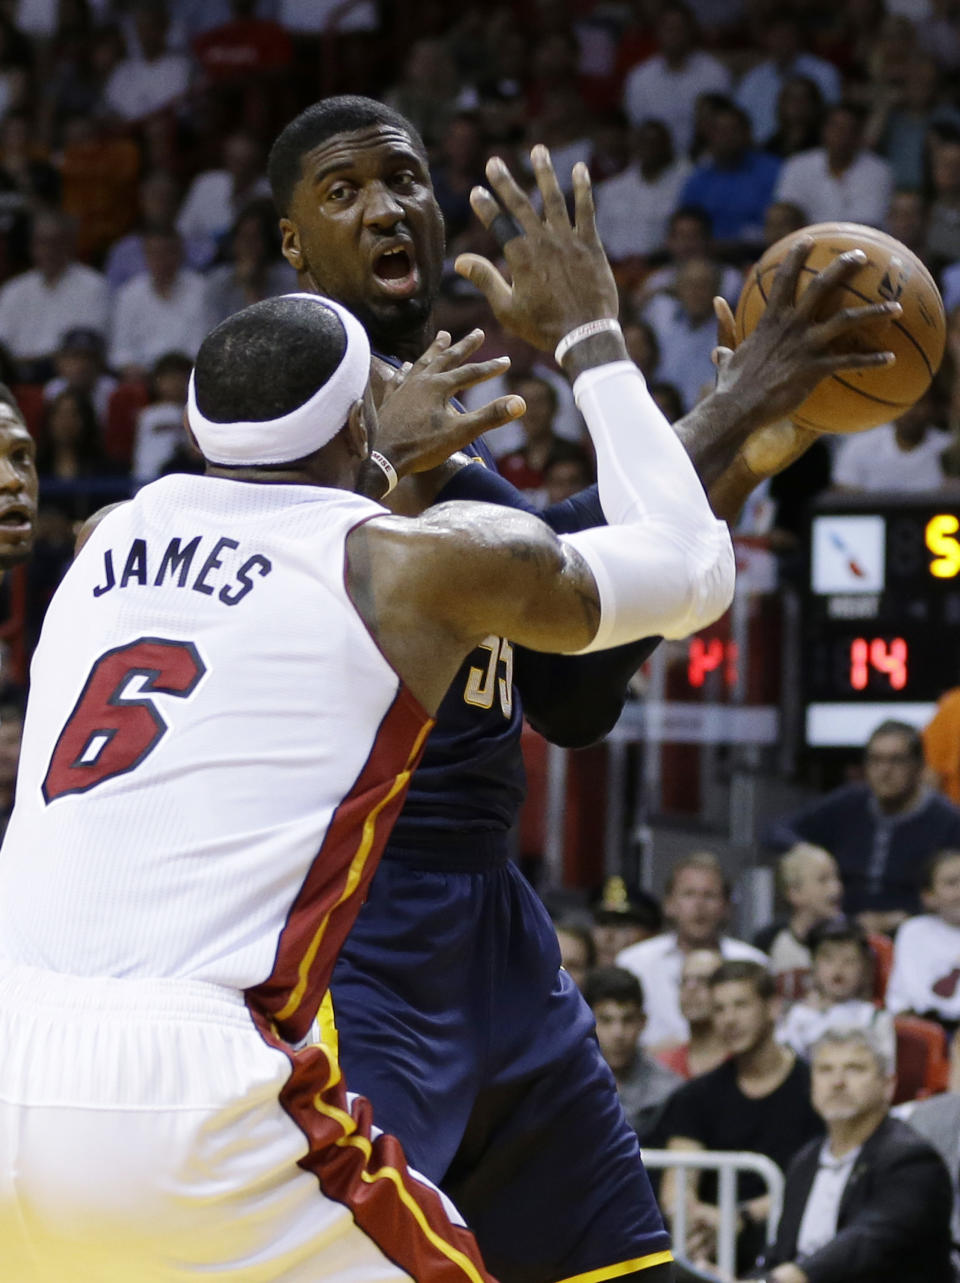 Indiana Pacers' Roy Hibbert (55) drives to the basket as Miami Heat's LeBron James (6) defends during the first half of an NBA basketball game, Friday, April 11, 2014, in Miami. (AP Photo/Lynne Sladky)